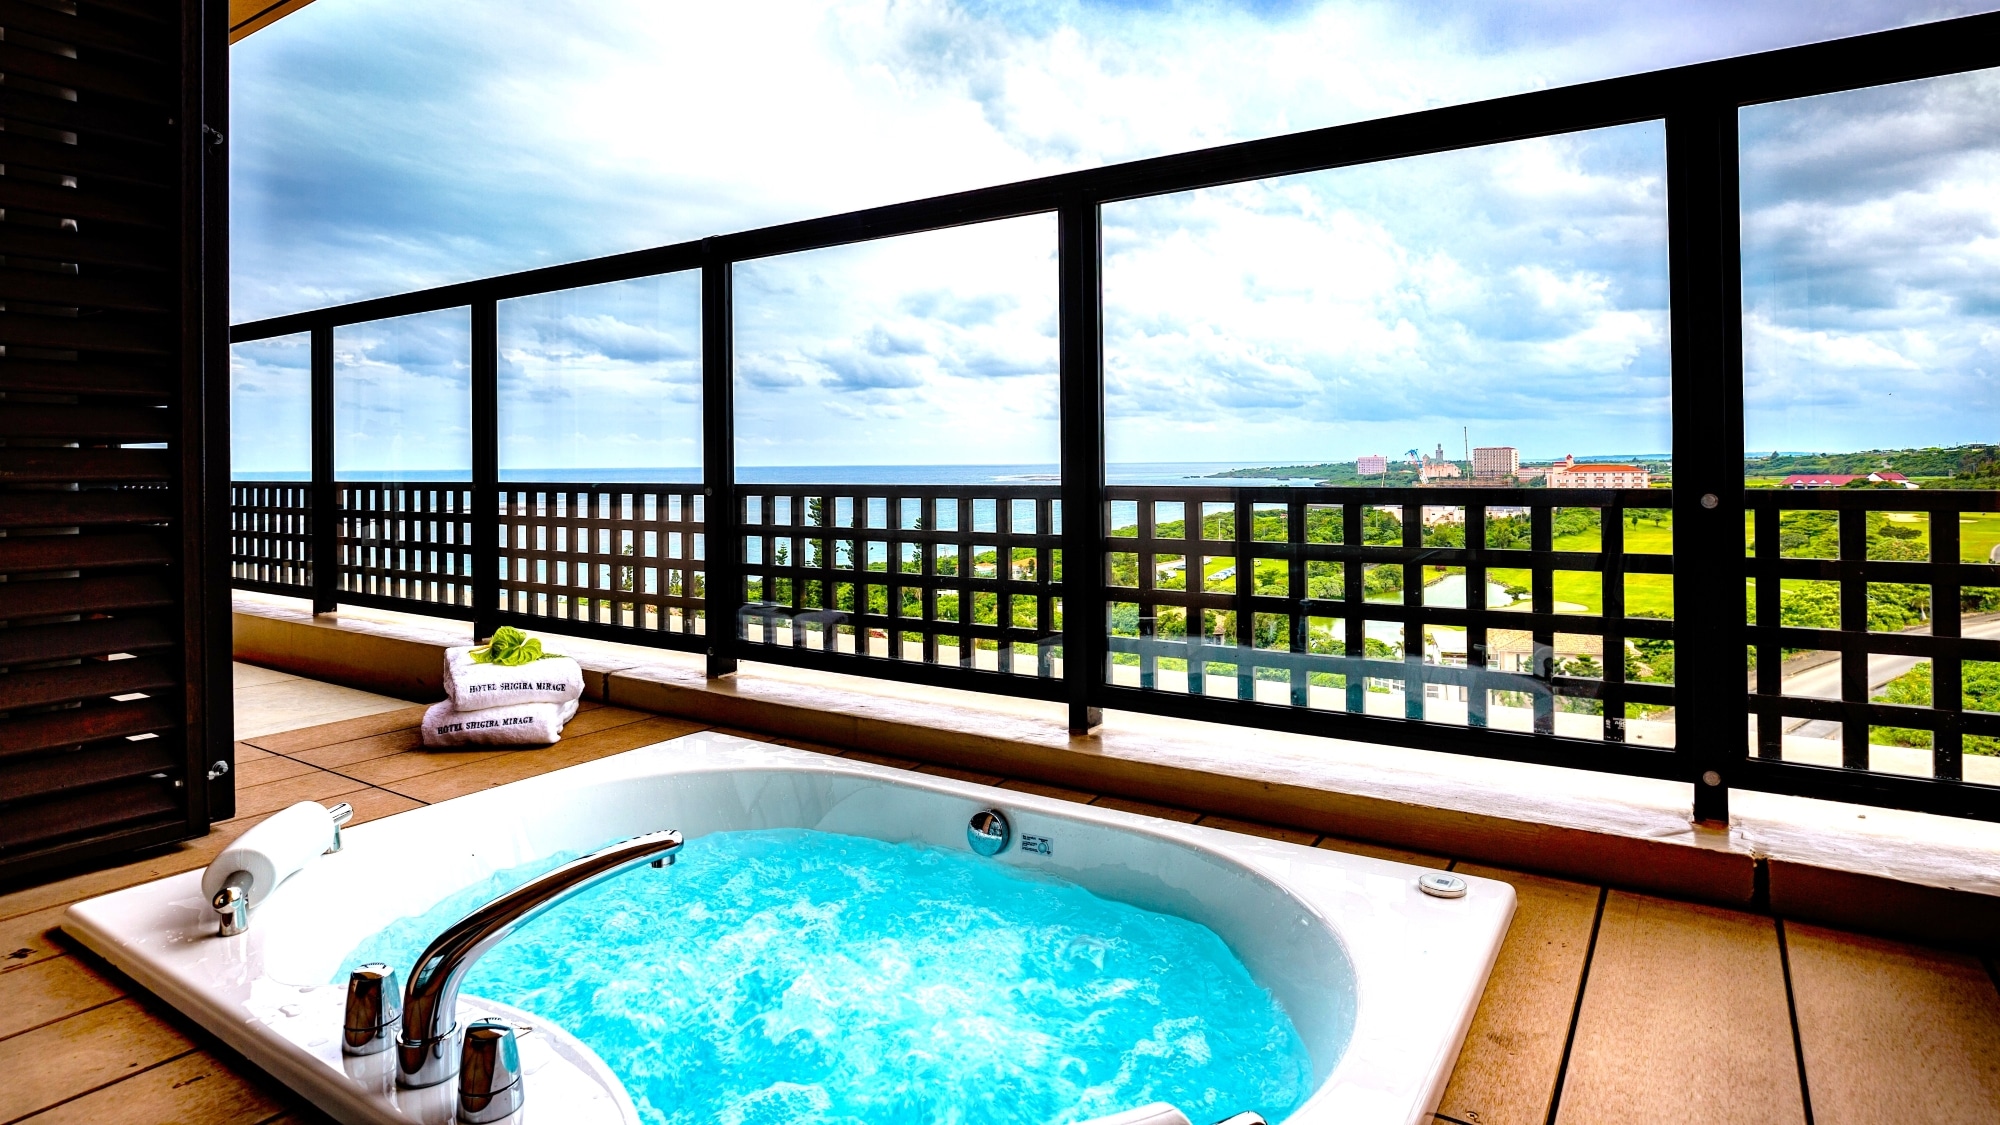 [Mirage Floor/Deluxe Suite 1 Bedroom] A jacuzzi is available on the terrace.